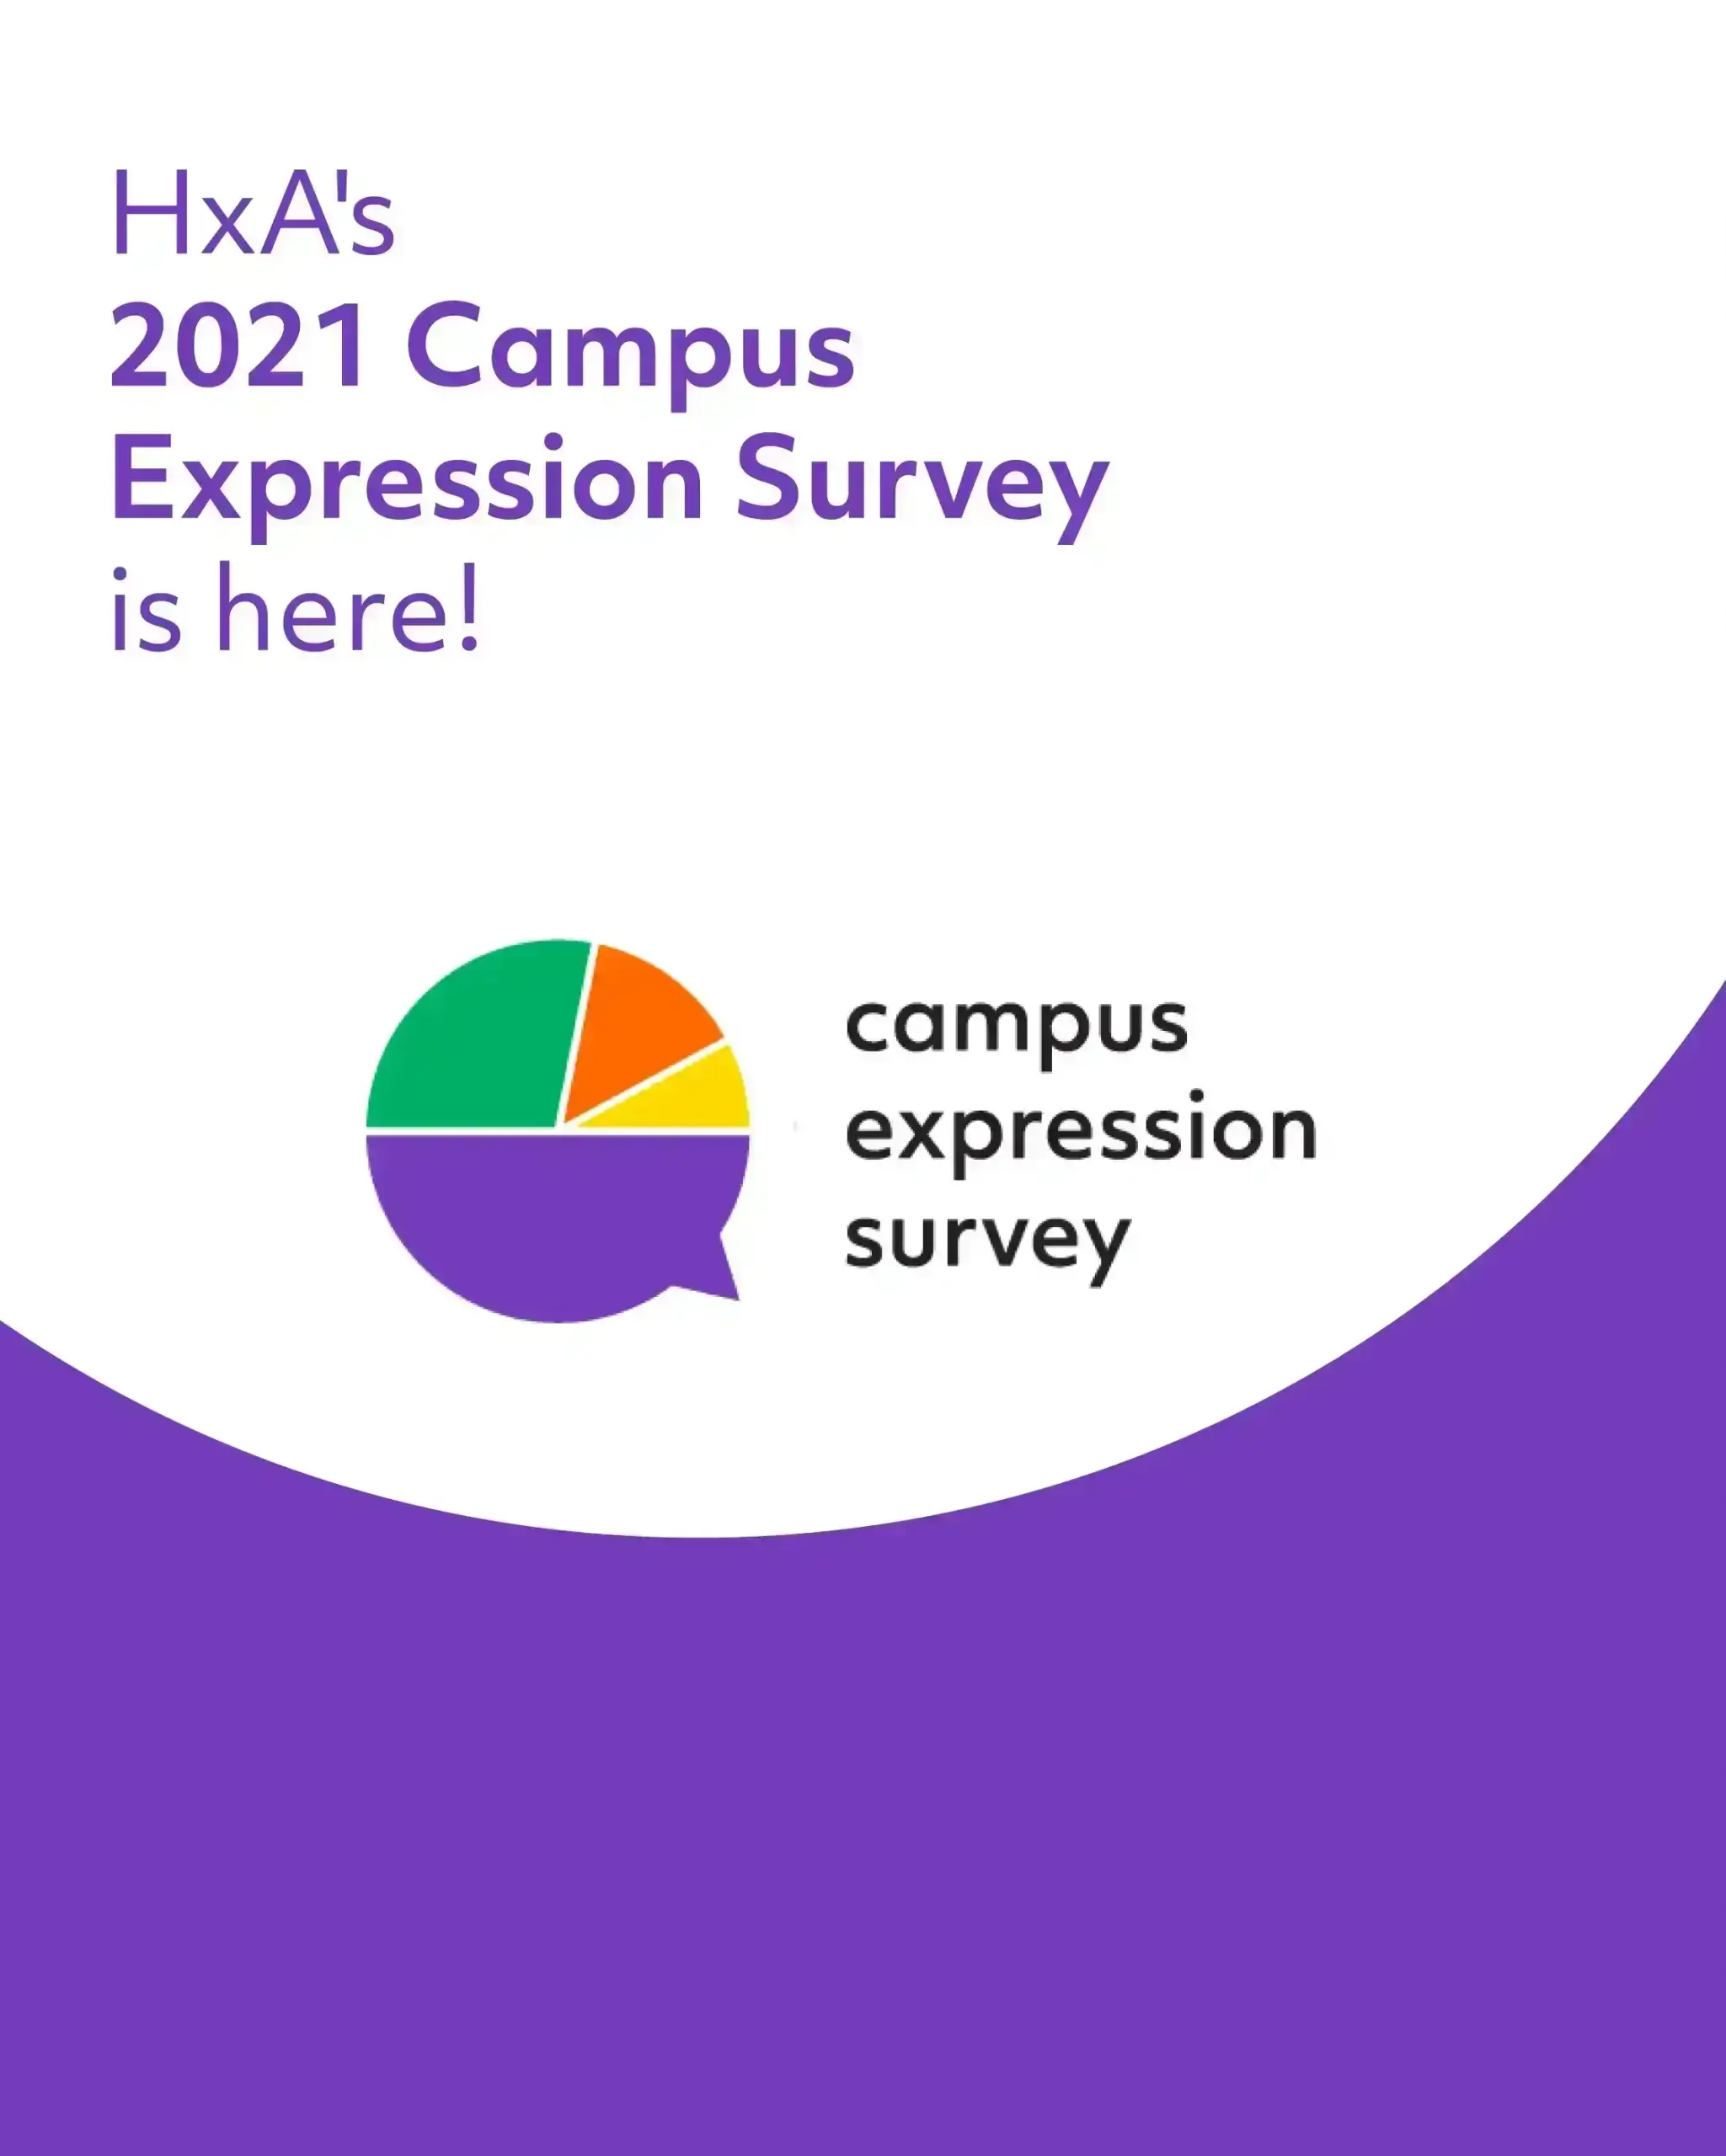 HxA's 2021 Campus Expression Survey Report